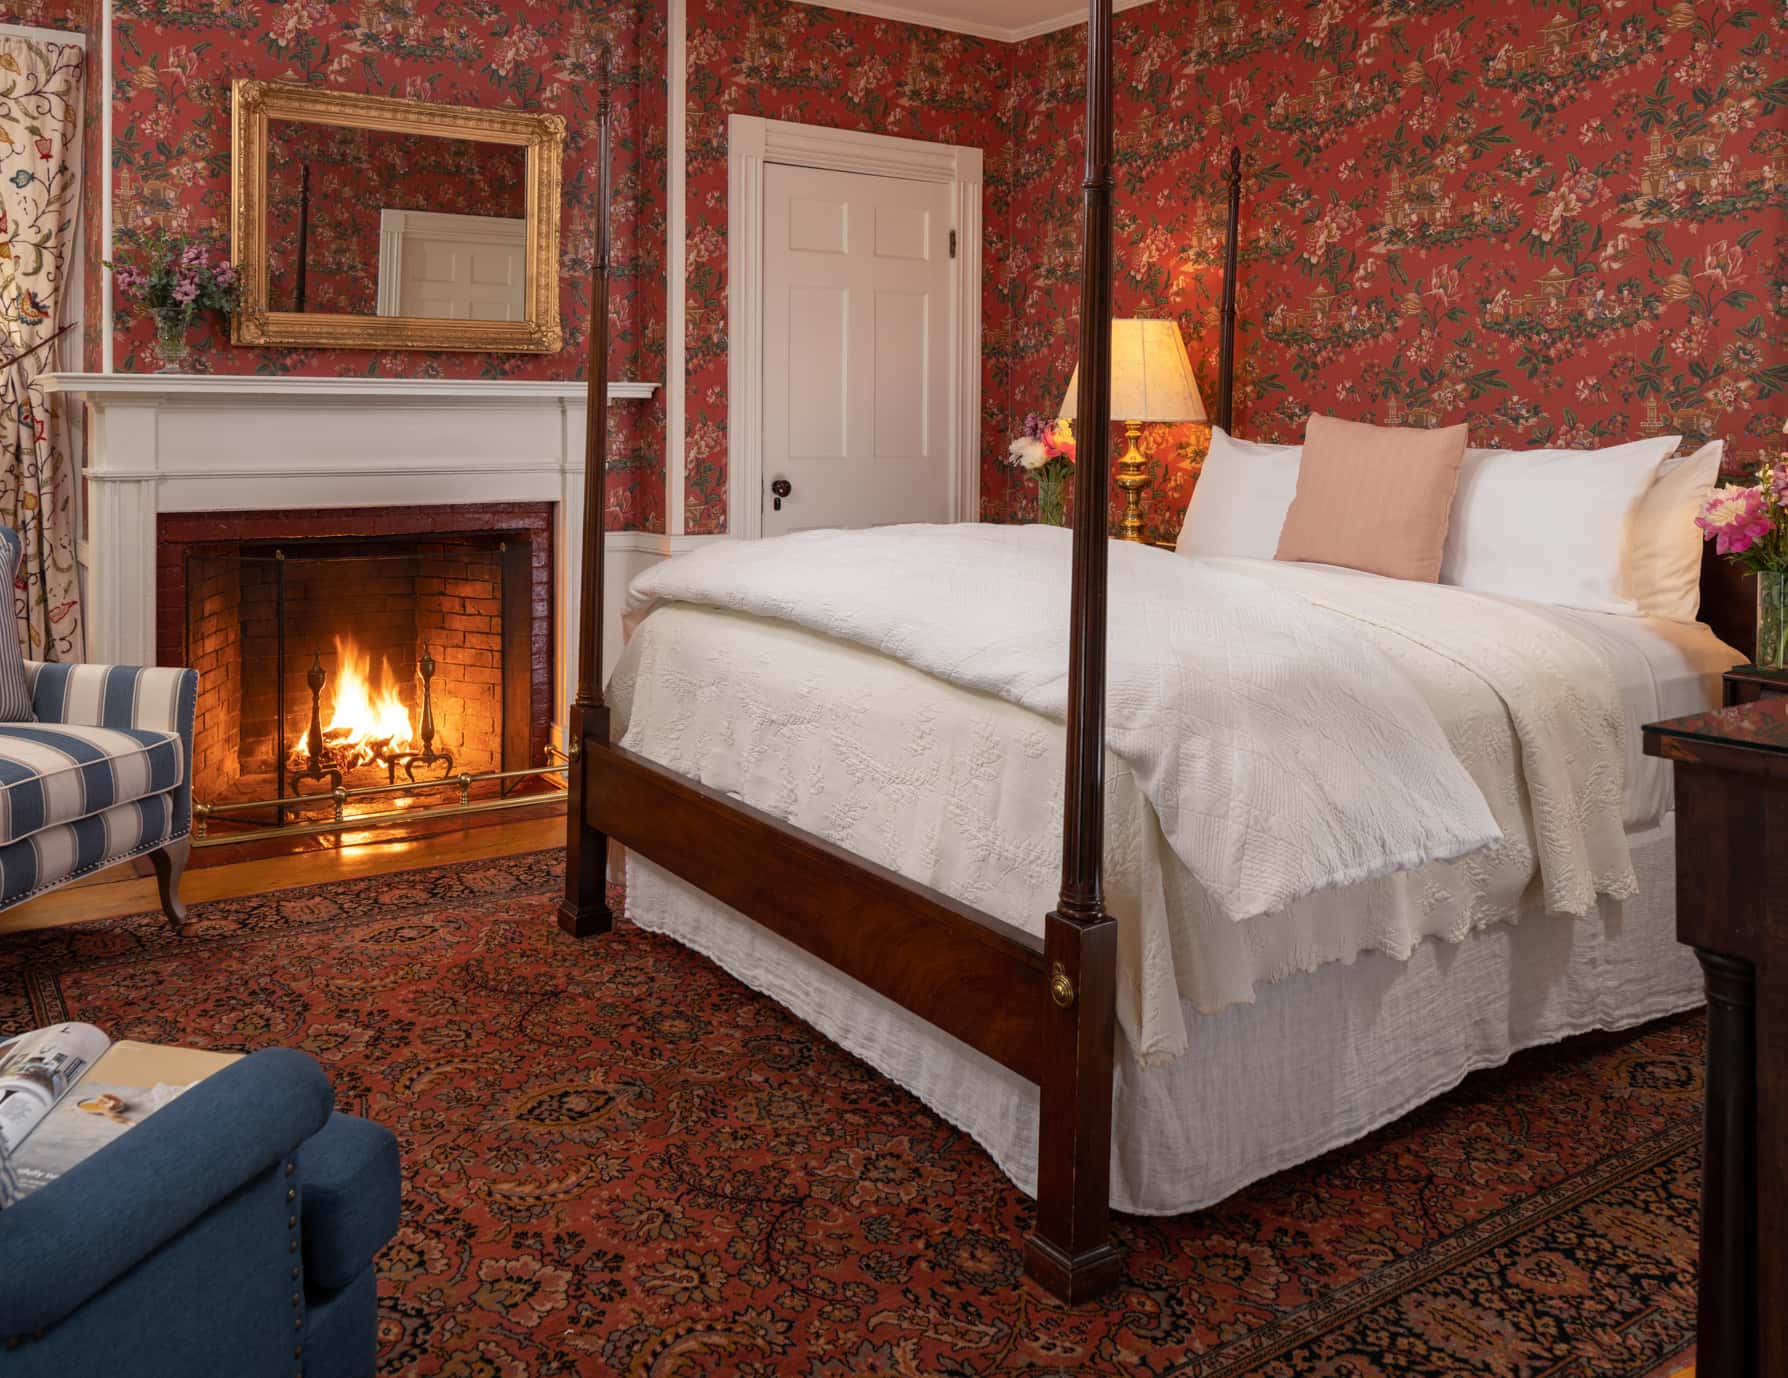 Room 10 with a king-size bed and a fireplace with a large area rug and seating area for two